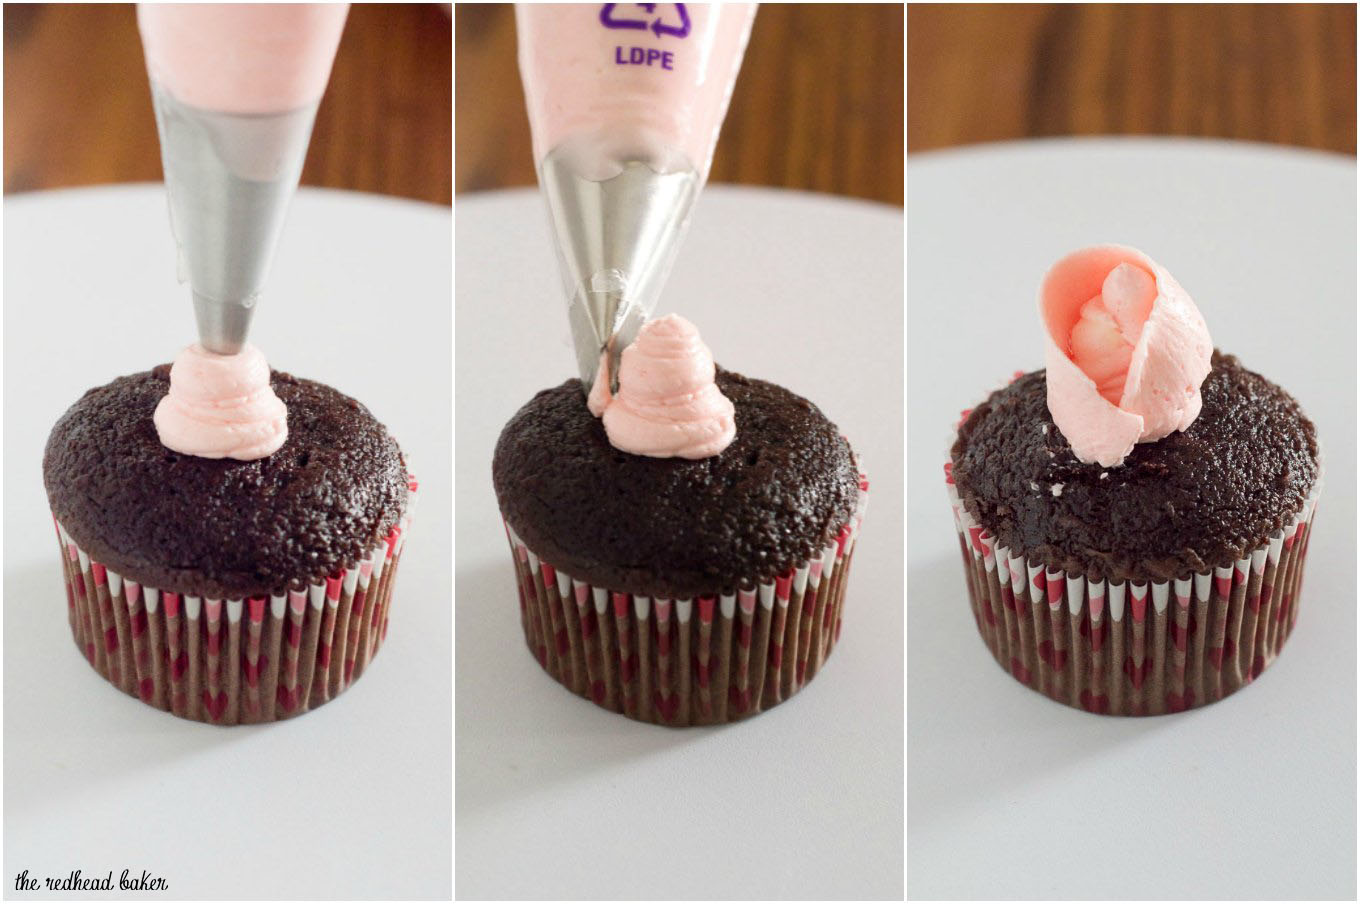 This tutorial shows you how to use frosting to turn your cupcakes into rose cupcakes using buttercream frosting and a few piping tools.